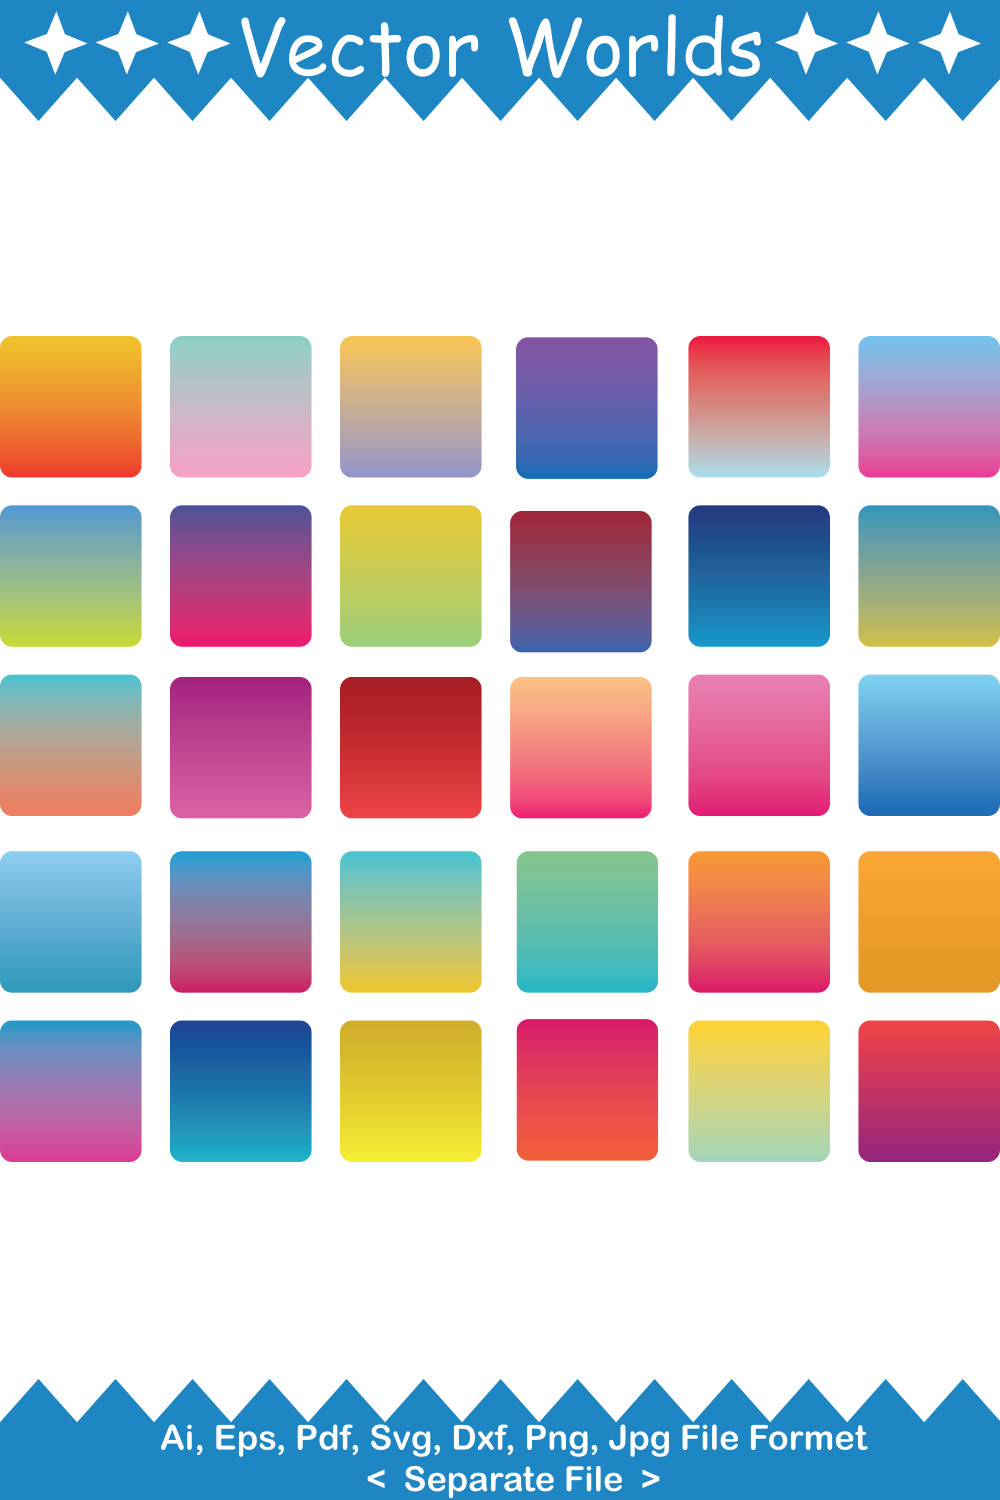 Set of wonderful colors vector images